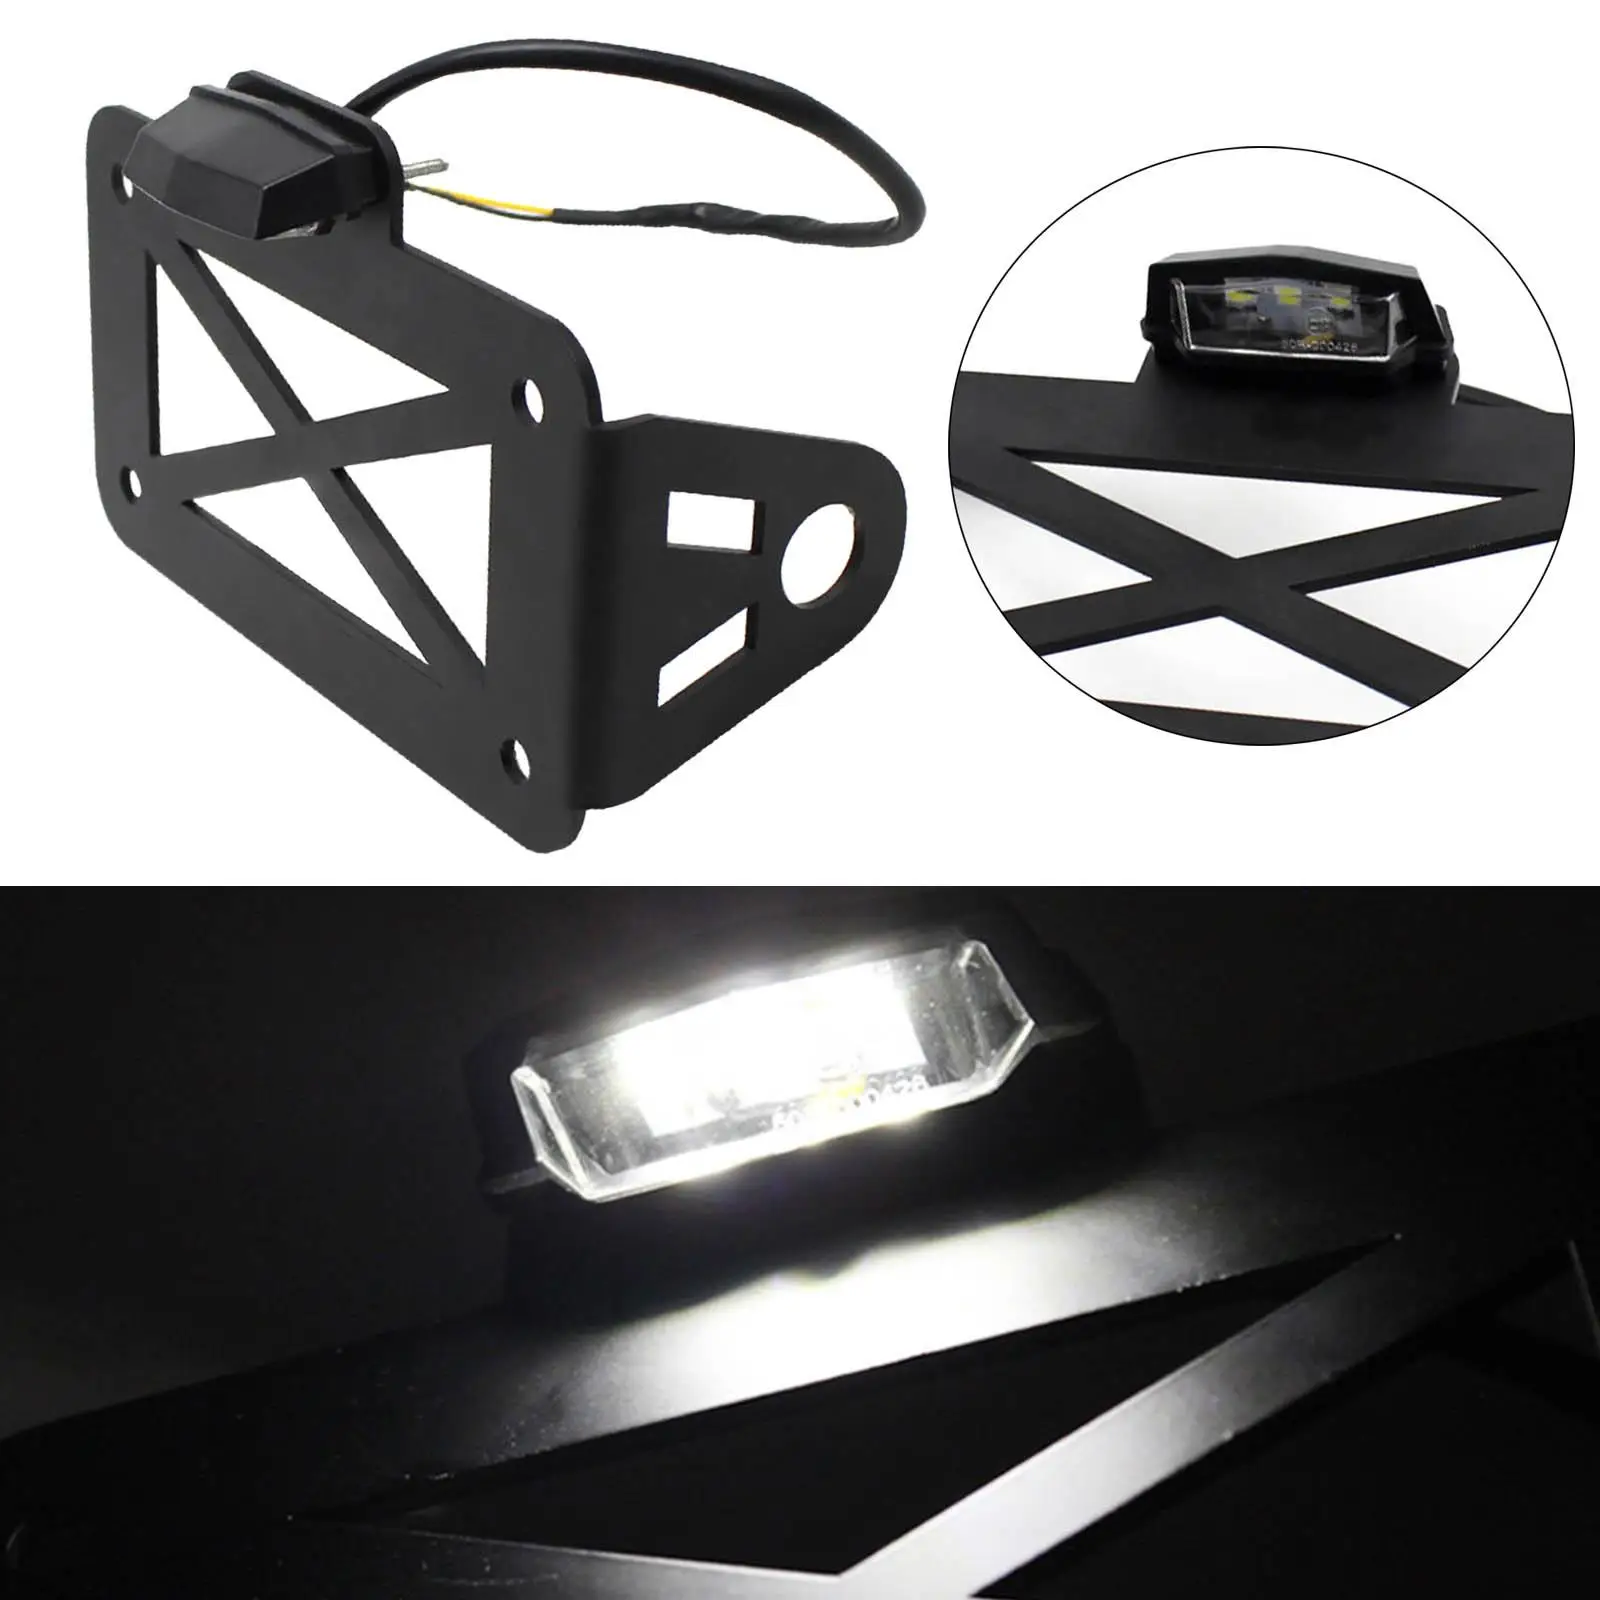 W/ LED Motorcycle License Plate Bracket Side Mount for Cruisers Stainless Steel License Plate Mount Fit for Motorbike Parts